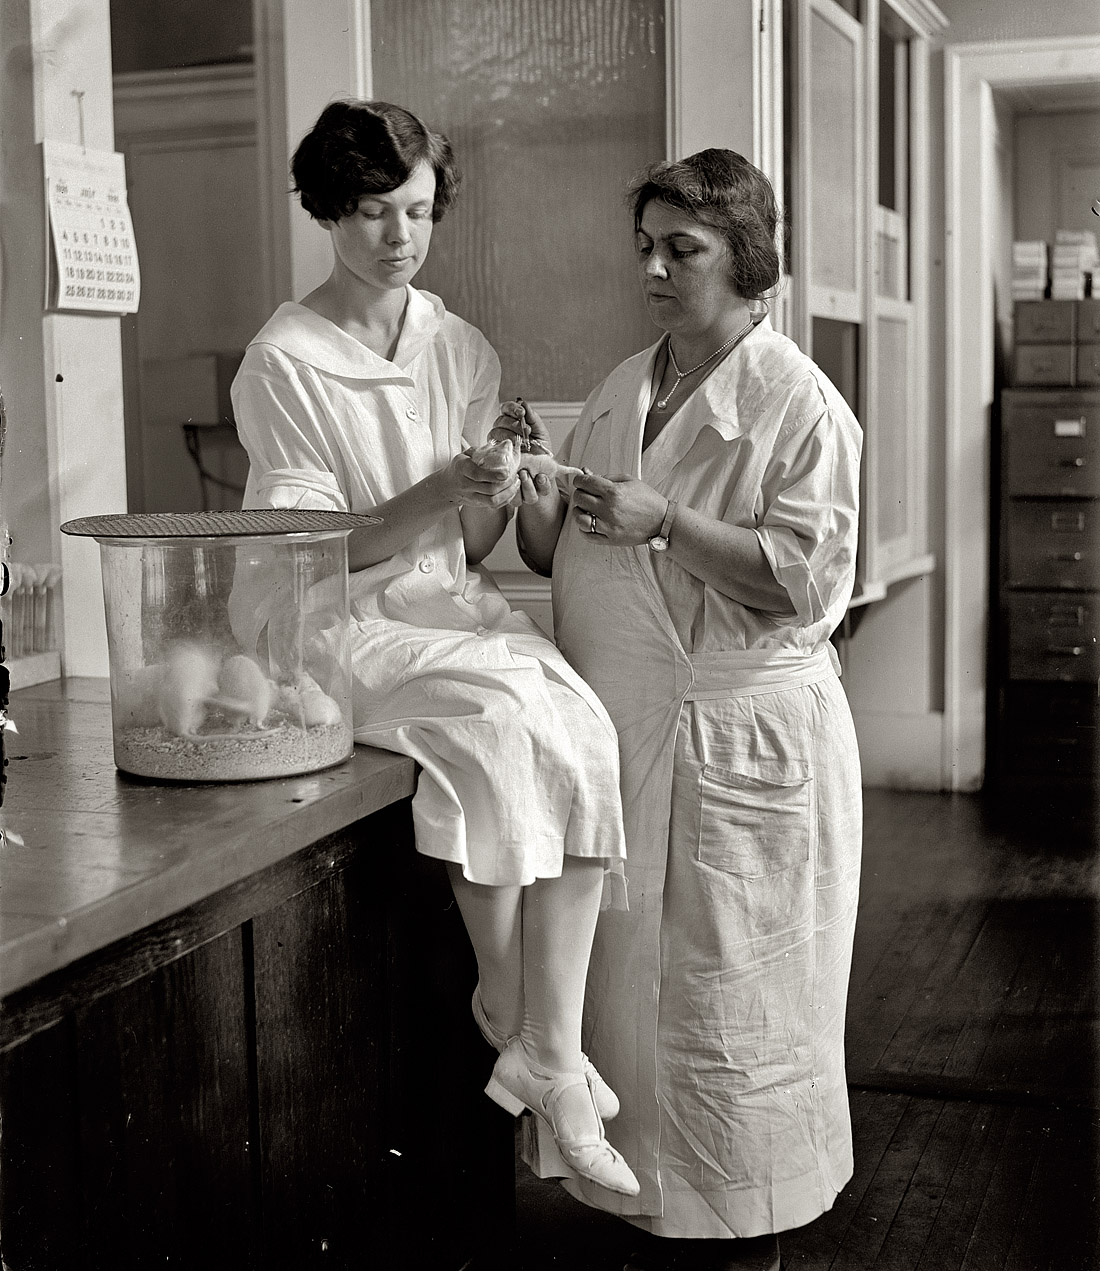 July 8, 1926. Washington, D.C. "Miss Hattie E. Alexander & Mrs. S.A. Carlin testing serum." View full size. National Photo Company Collection. [Update: A few years after this photo was taken, Hattie (on the left) would become Dr. Alexander. As president of the American Pediatric Society in the 1960s, she was among the first women to head a major medical association.]